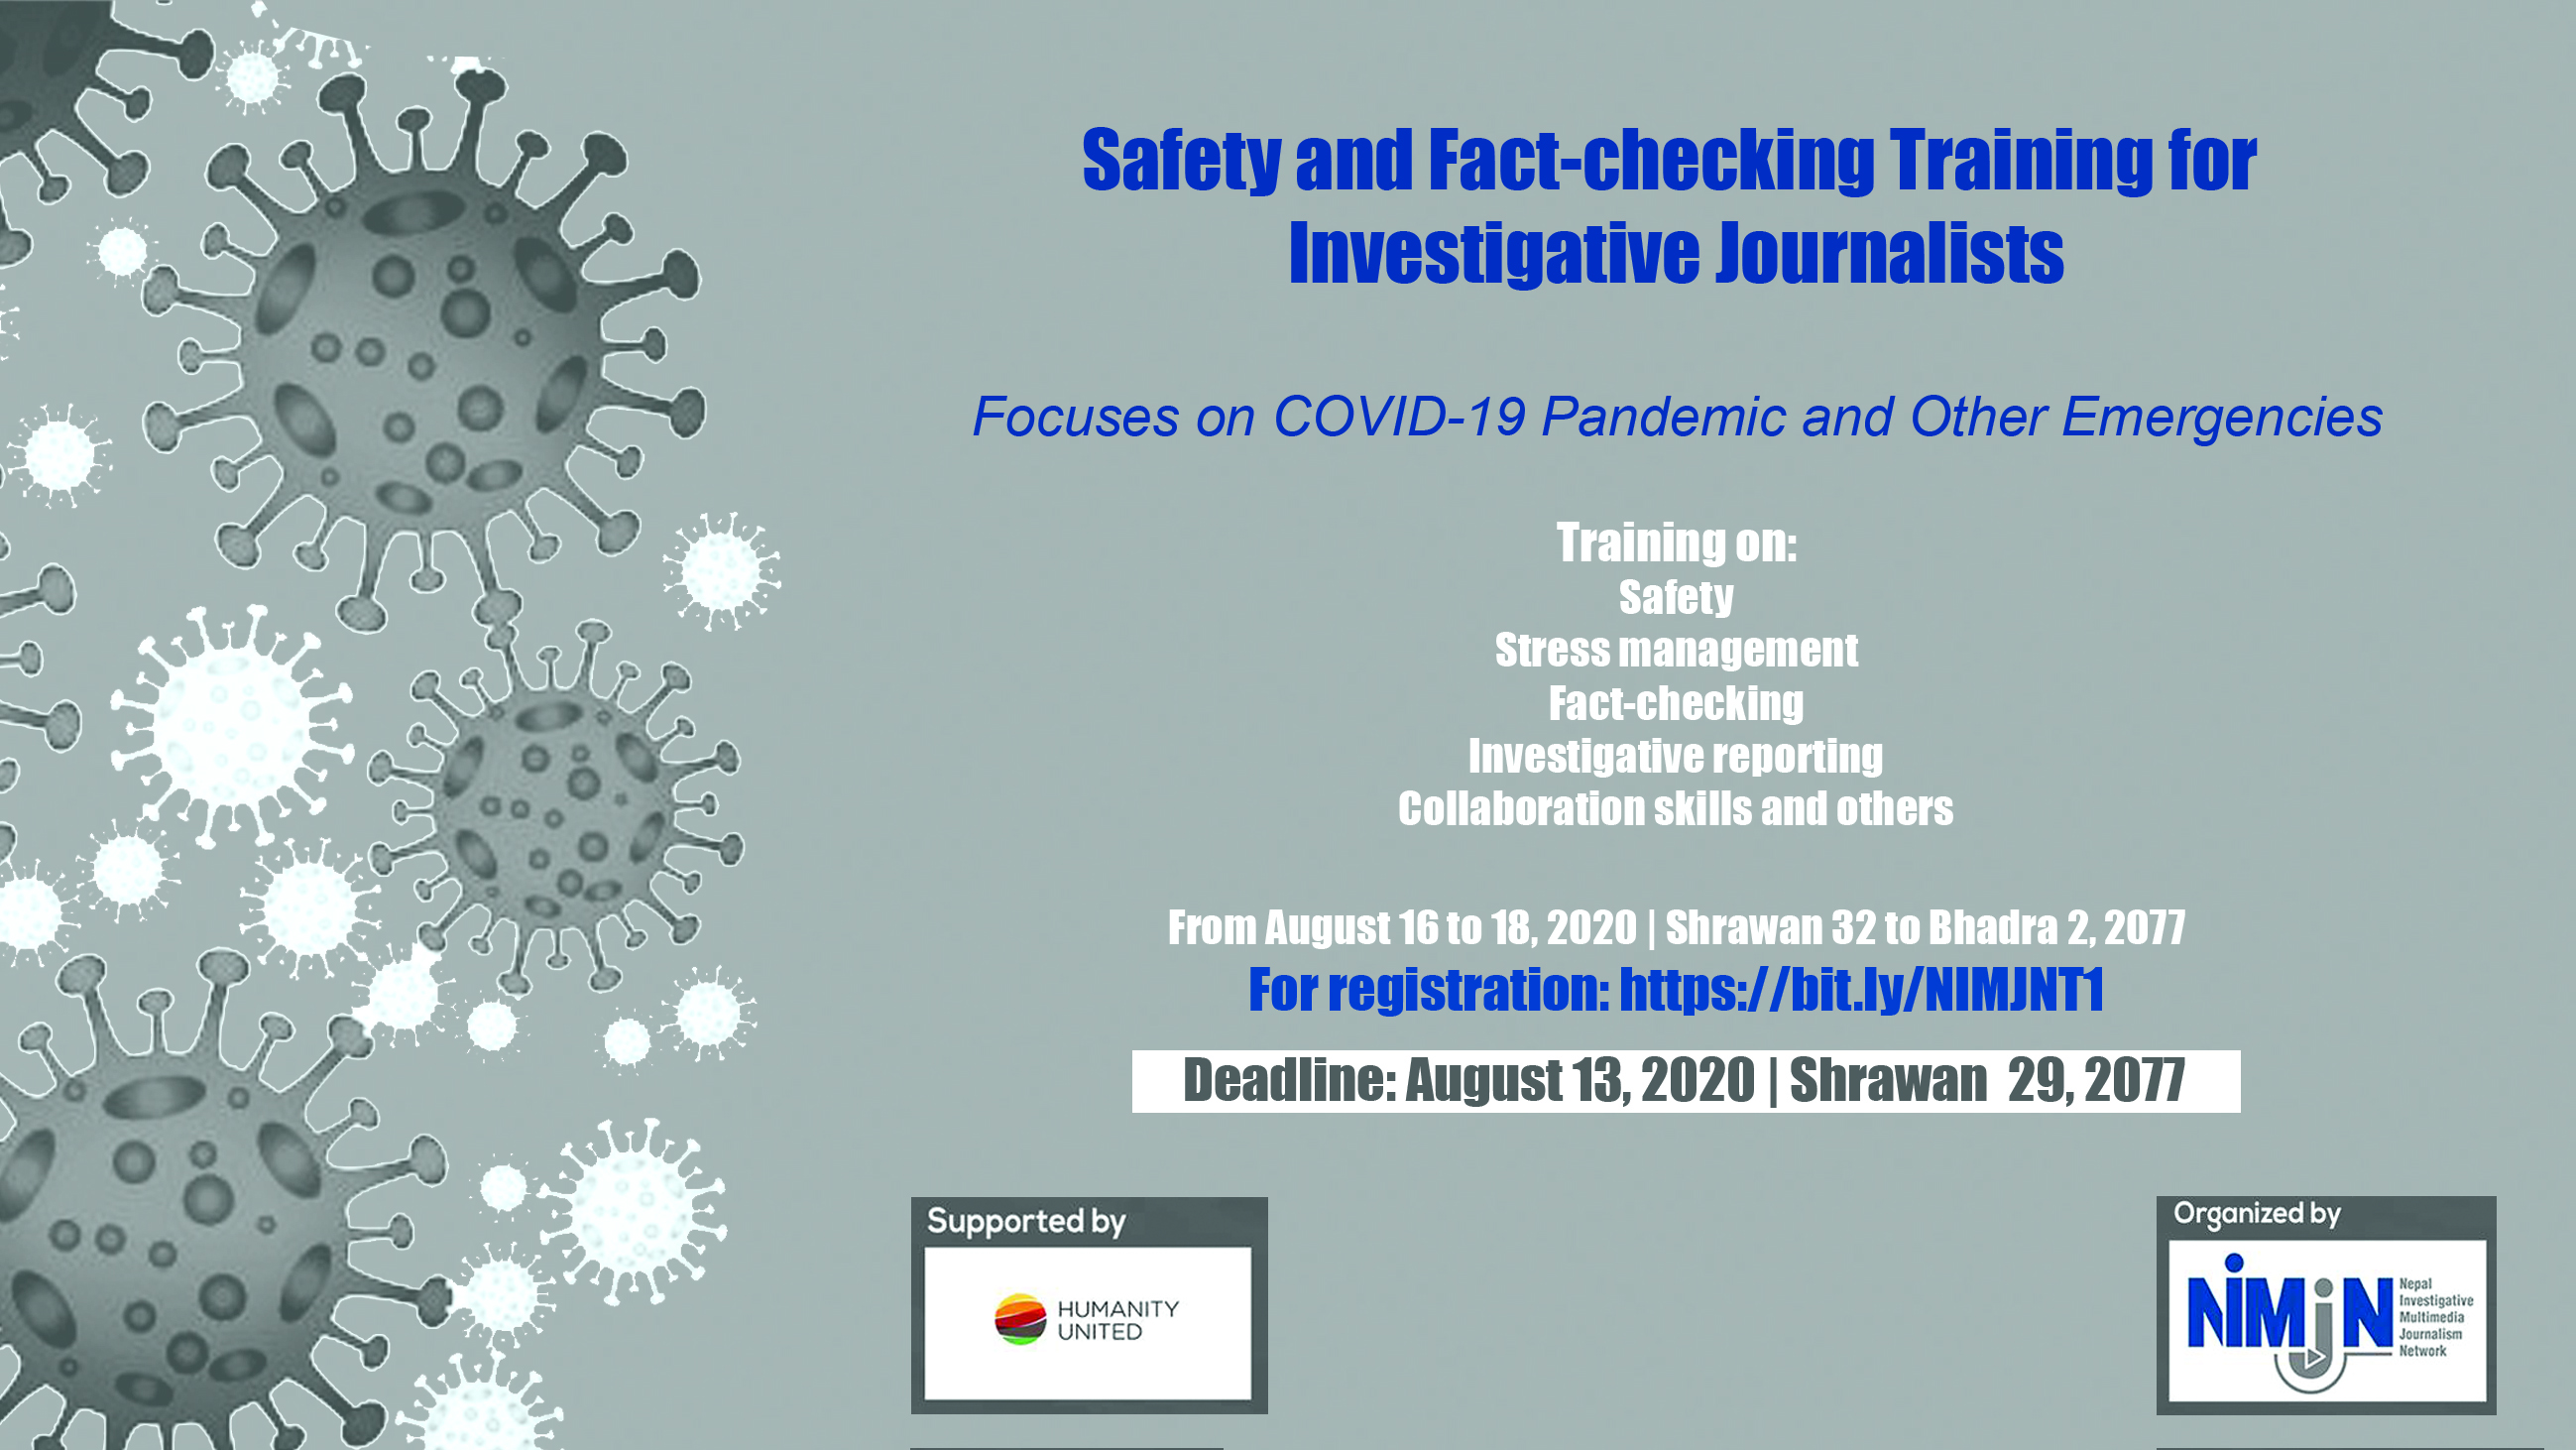 Safety and Fact-Checking Training for Investigative Journalists